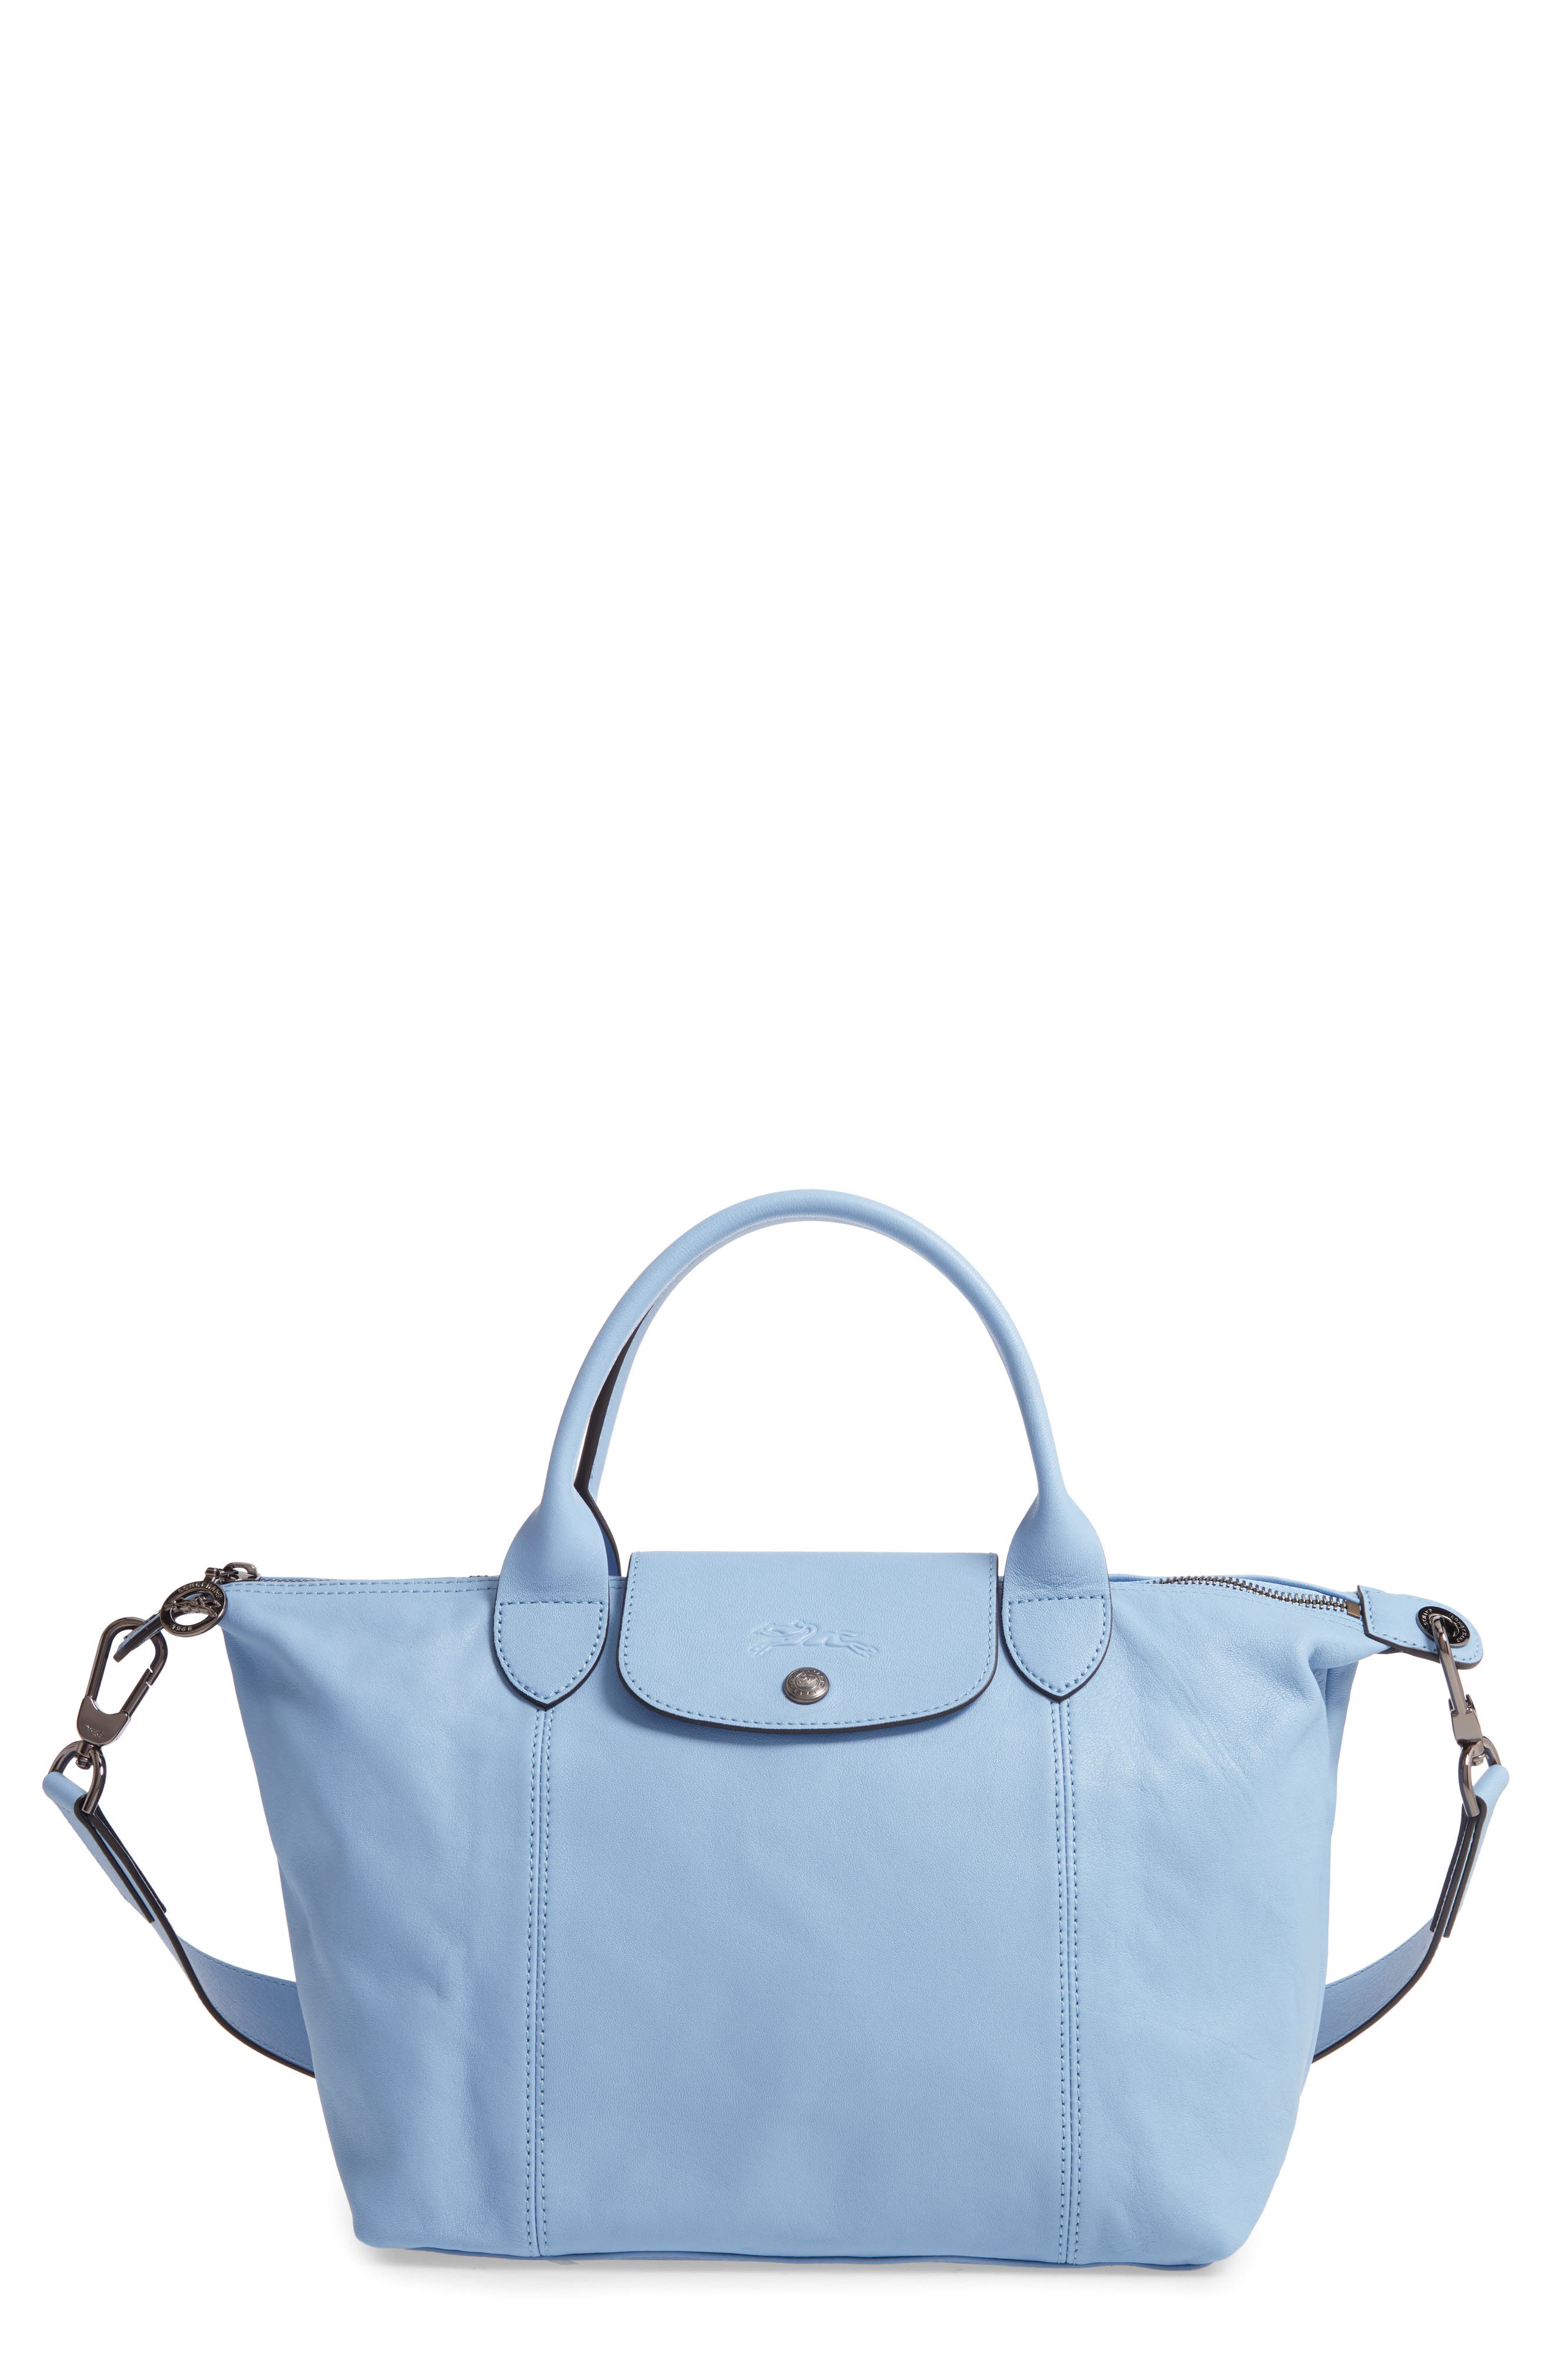 Le Pliage Cuir Leather Small Shoulder 